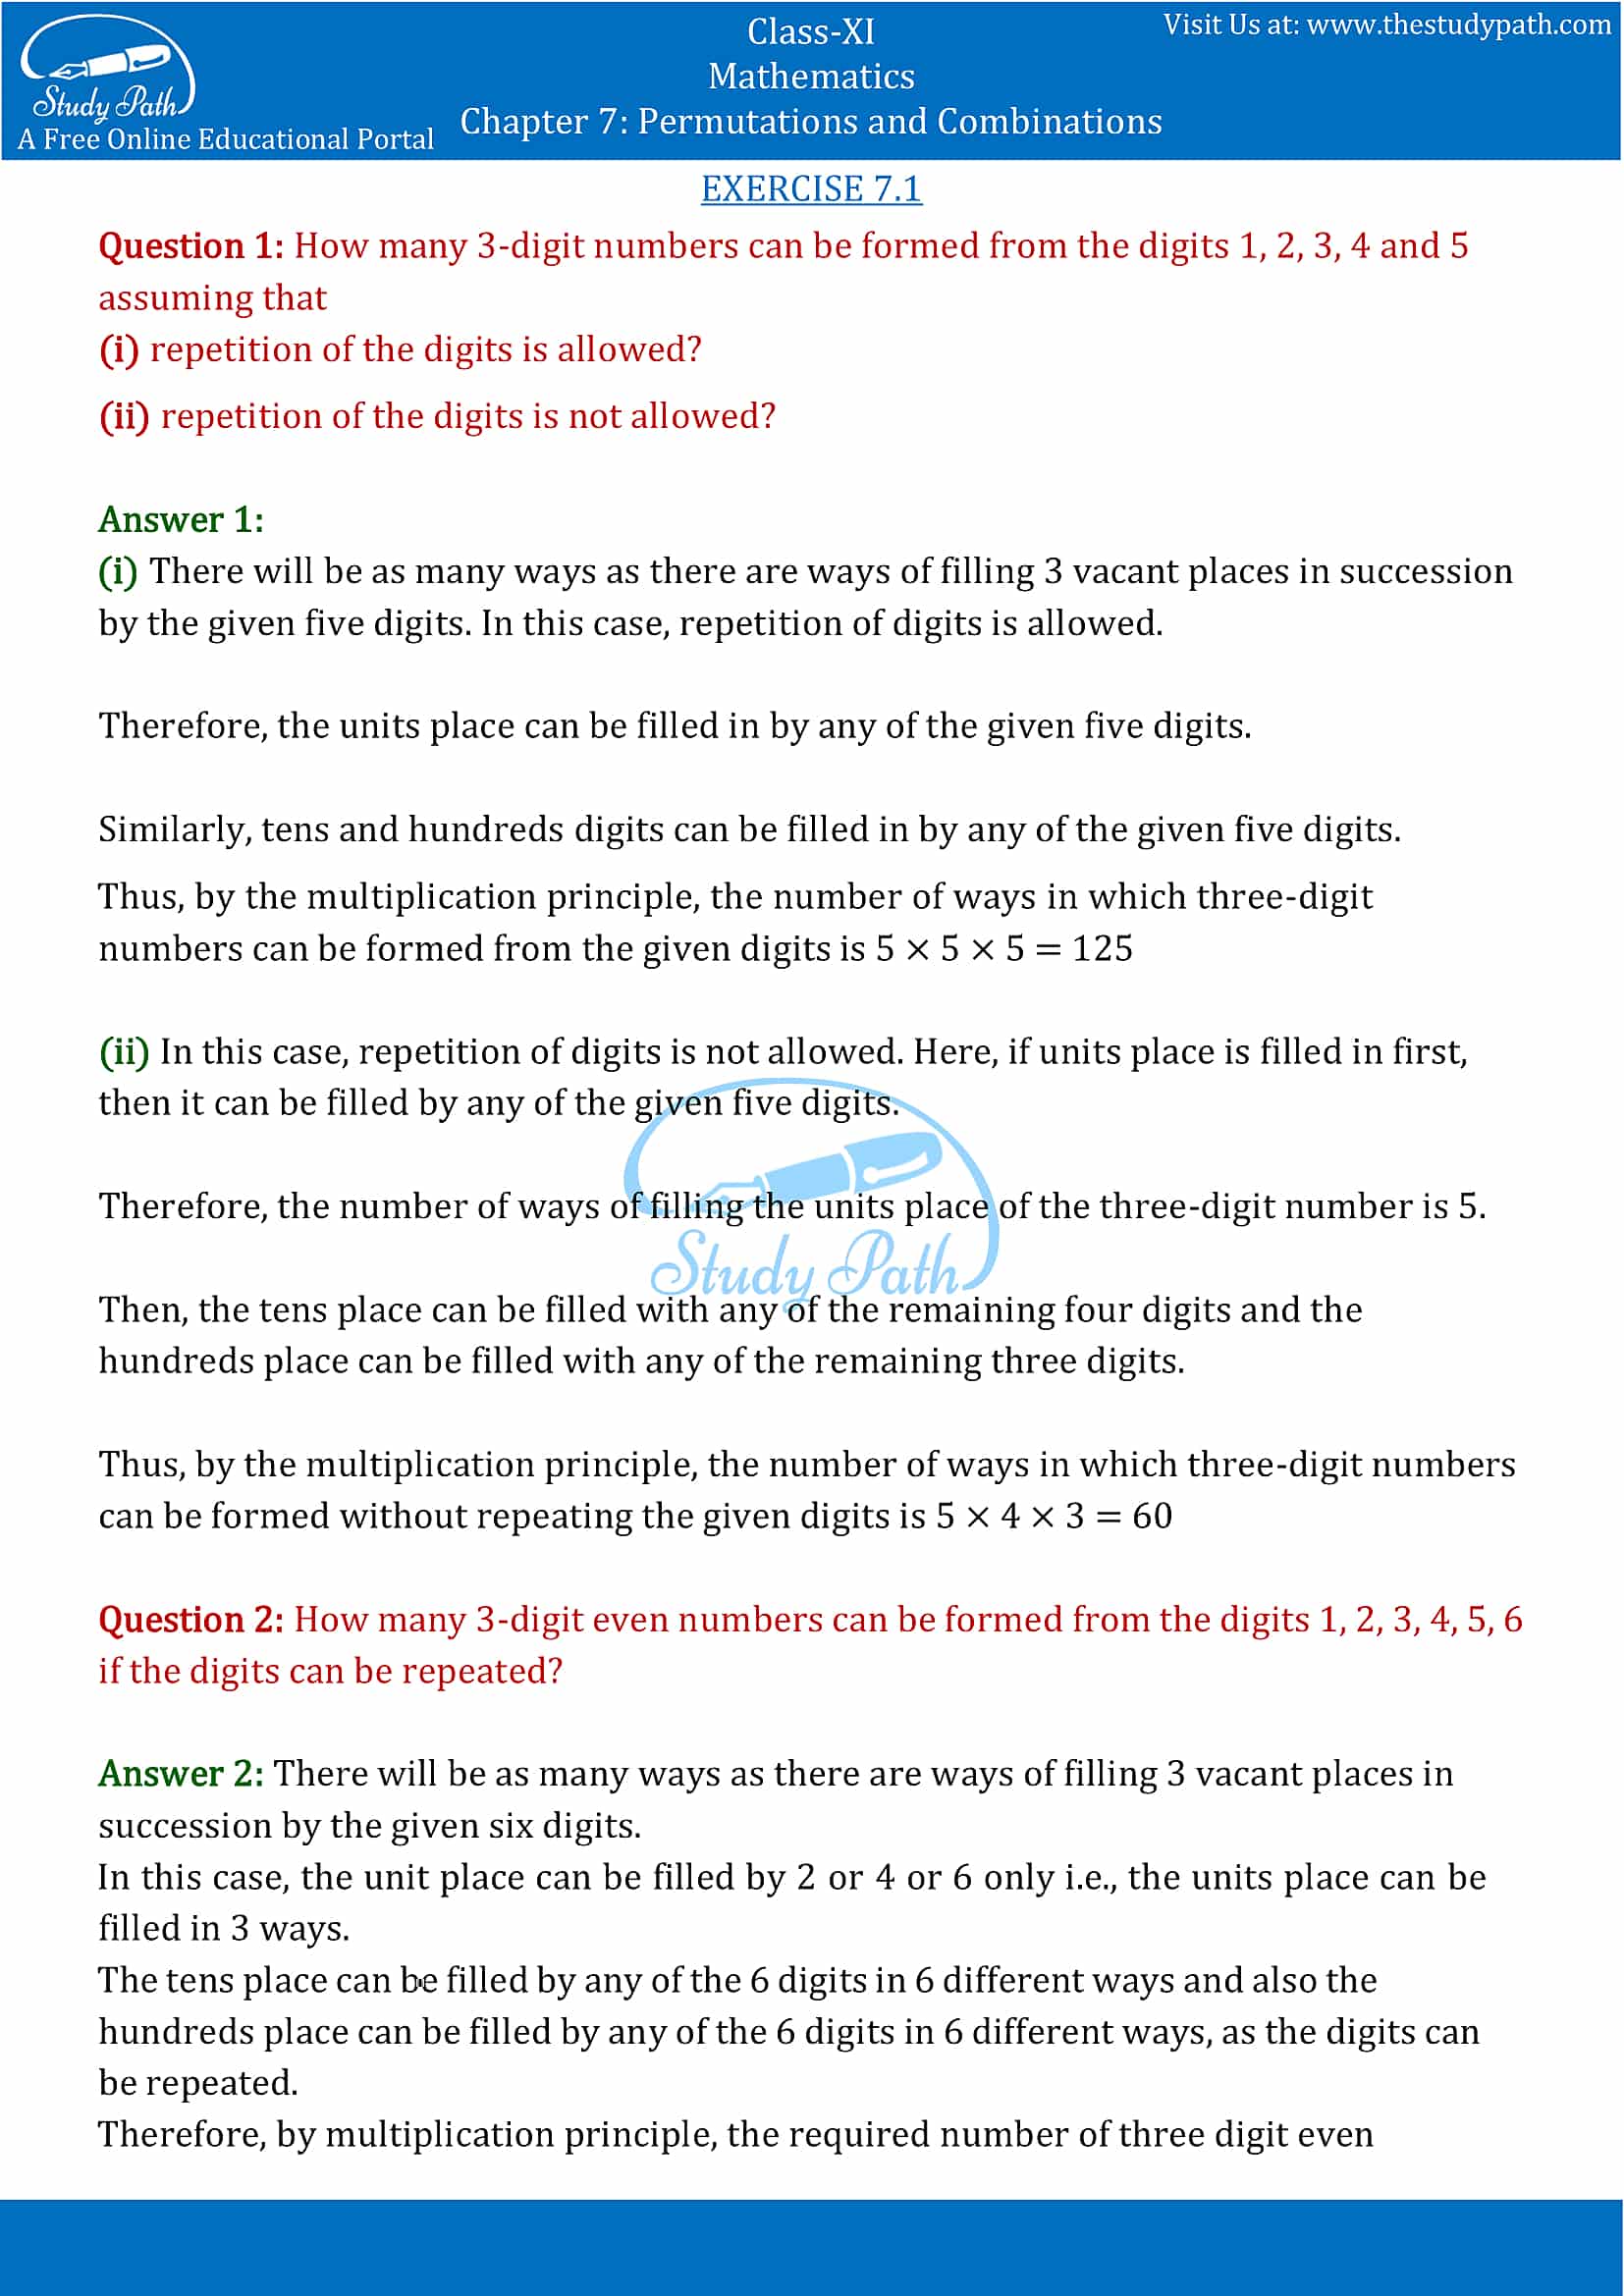 NCERT Solutions for Class 11 Maths chapter 7 Permutations and Combinations part-1